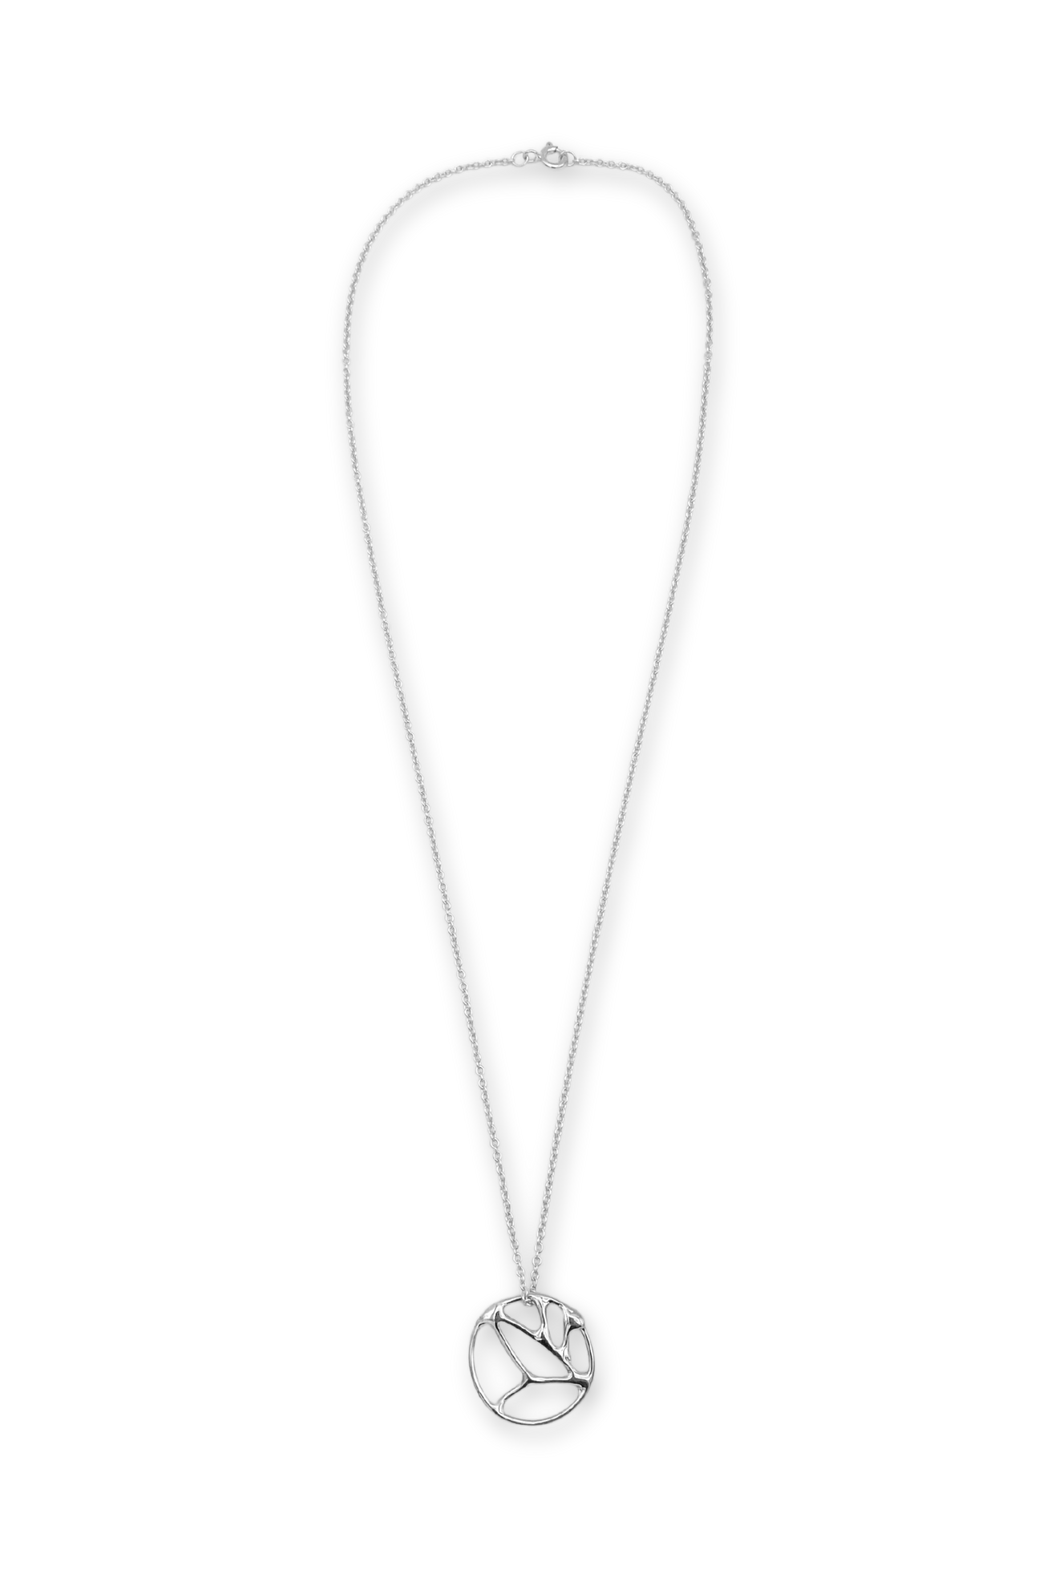 Medium Courage Pendant Necklace in Sterling Silver